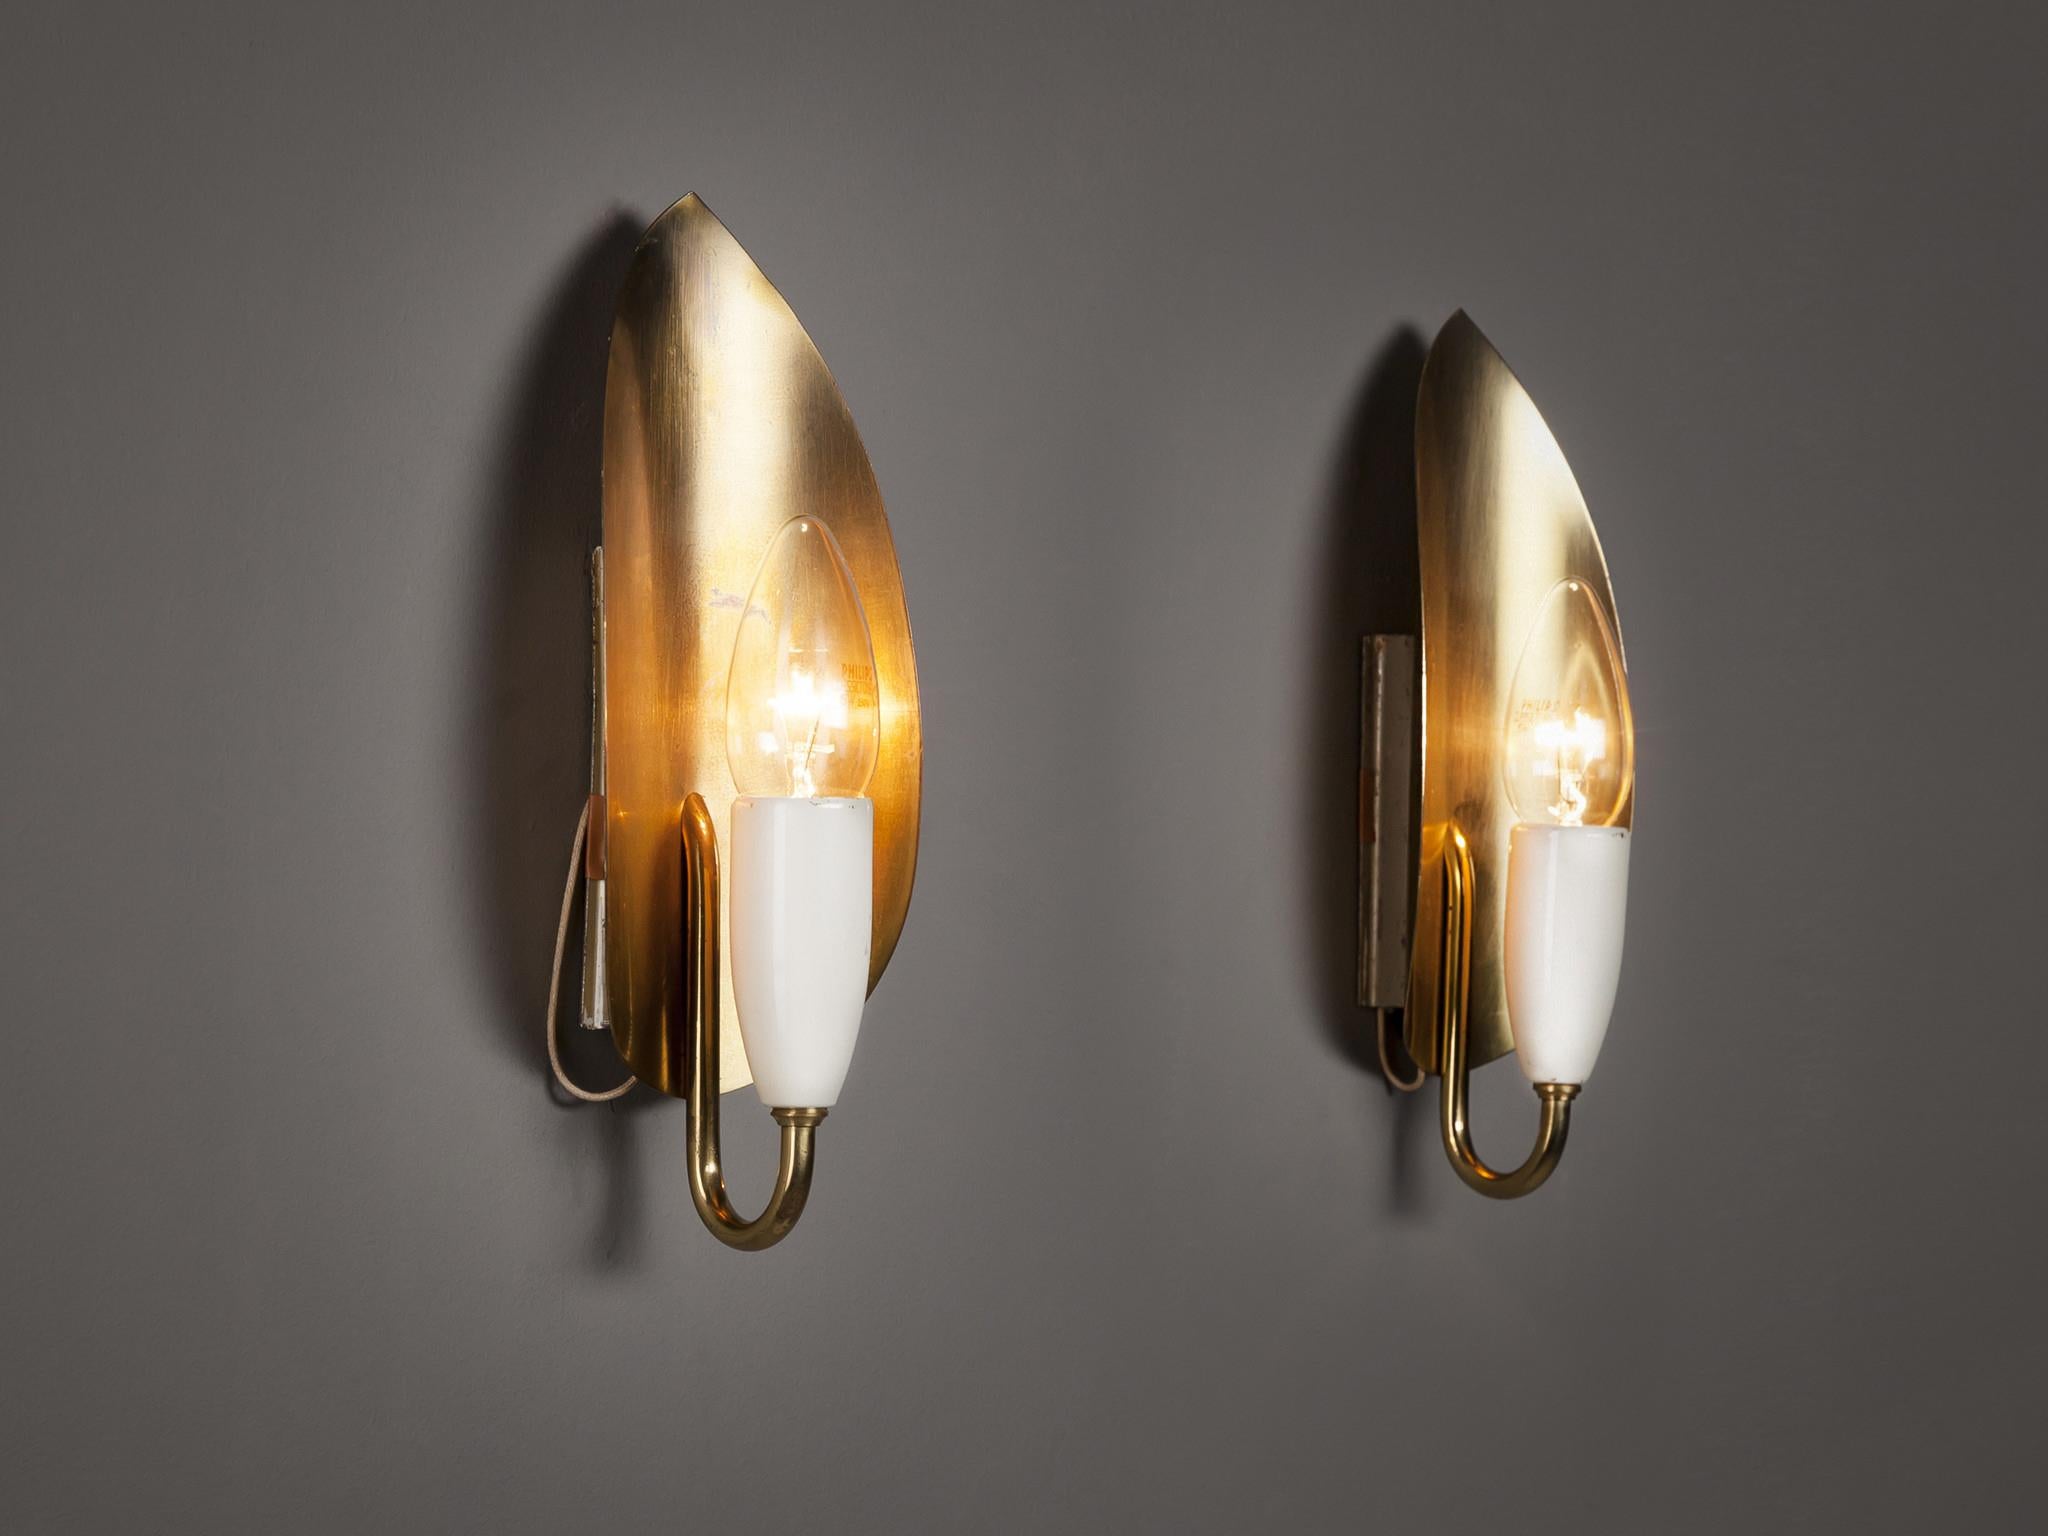 European Pair of Candle Wall Lights in Brass